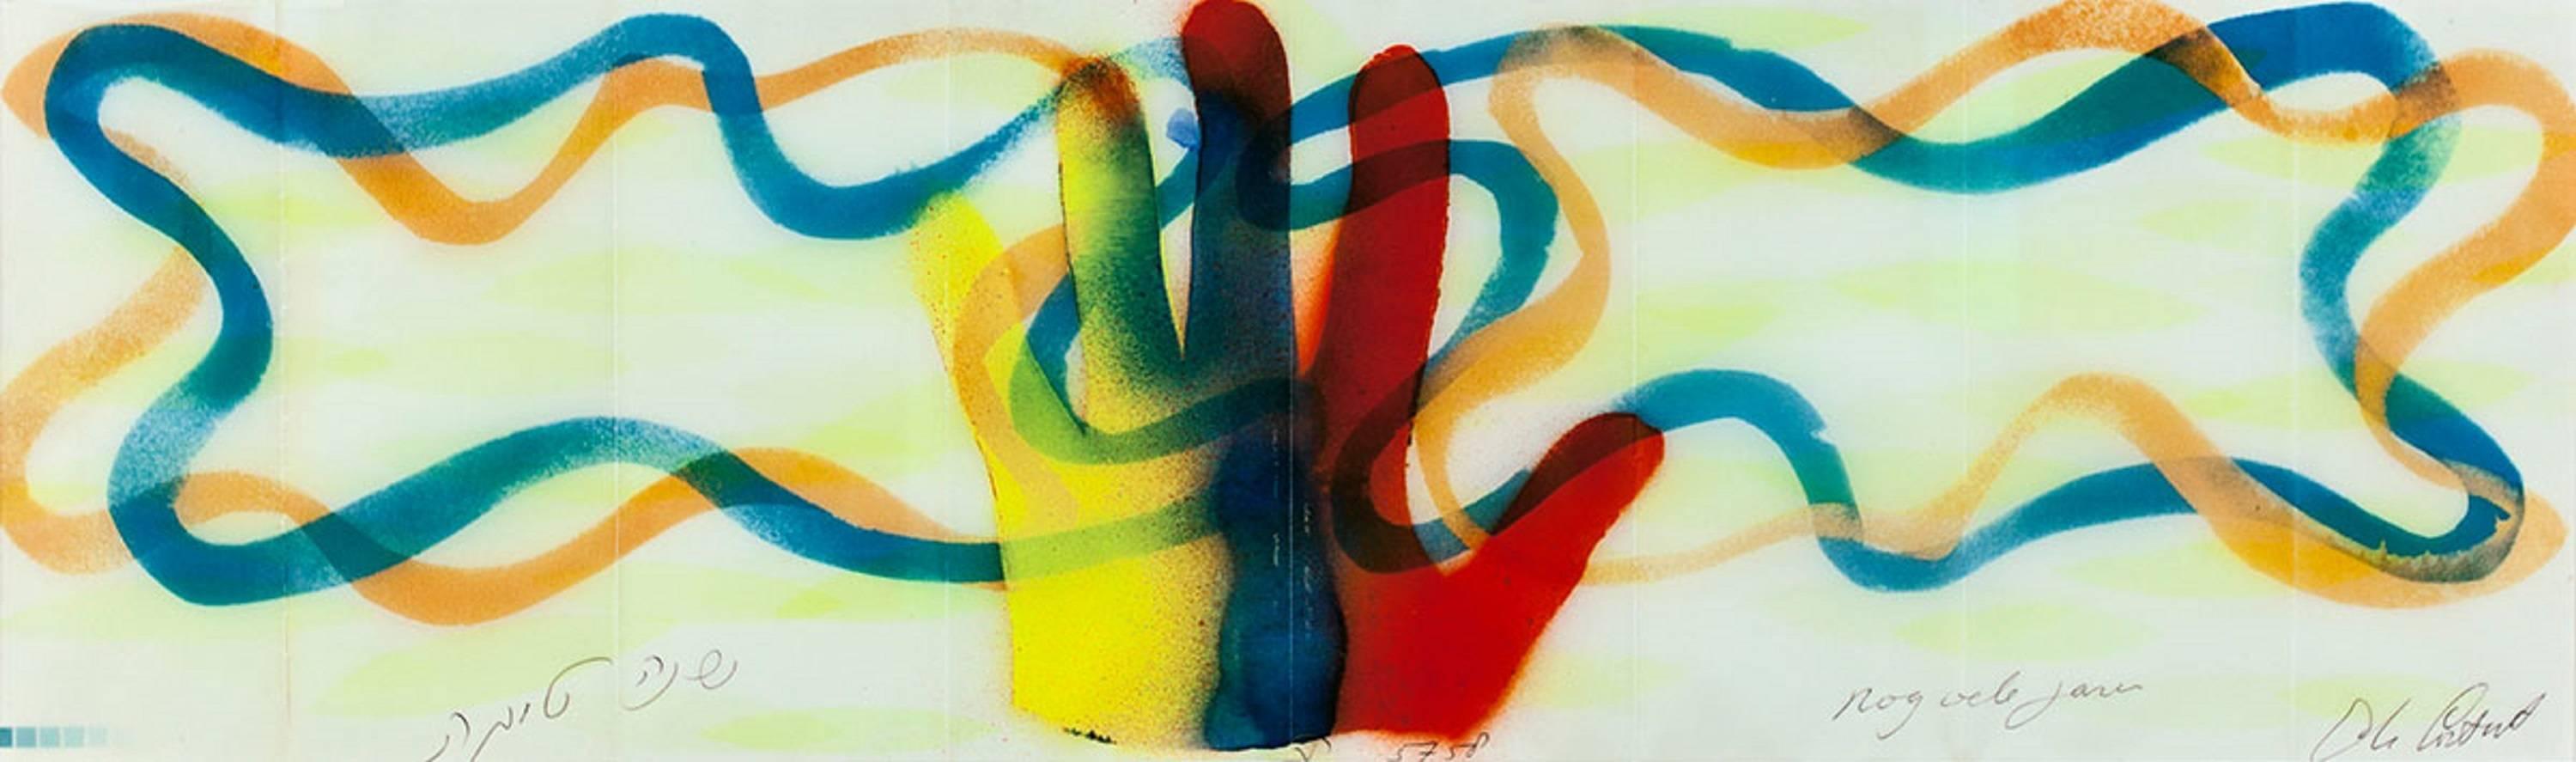 Eli Content  Abstract Painting - HAND, Pop Art New Years Greeting